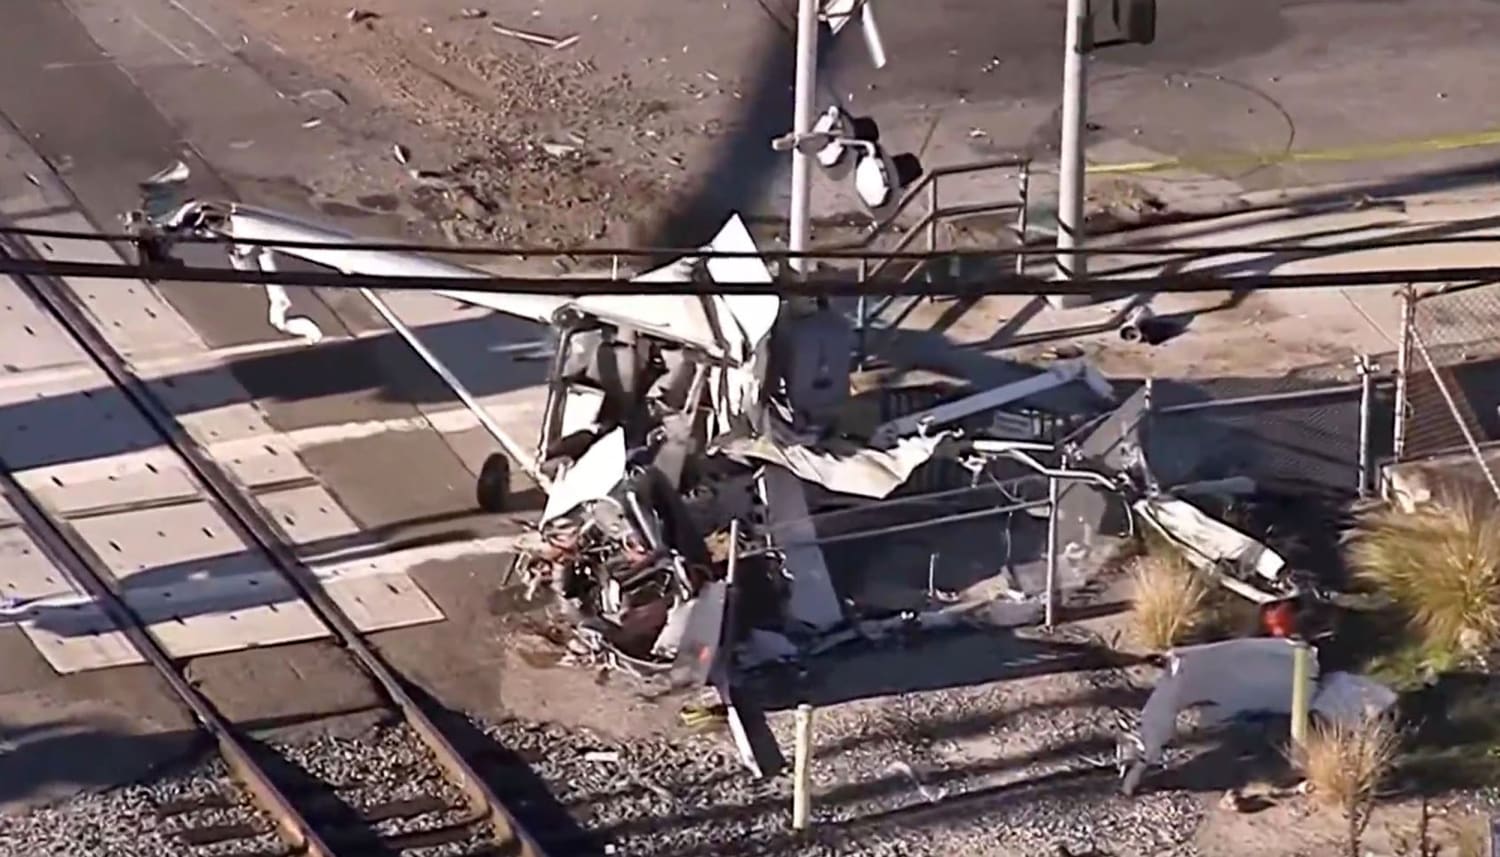 Officers pull pilot from crashed plane seconds before train slams into it